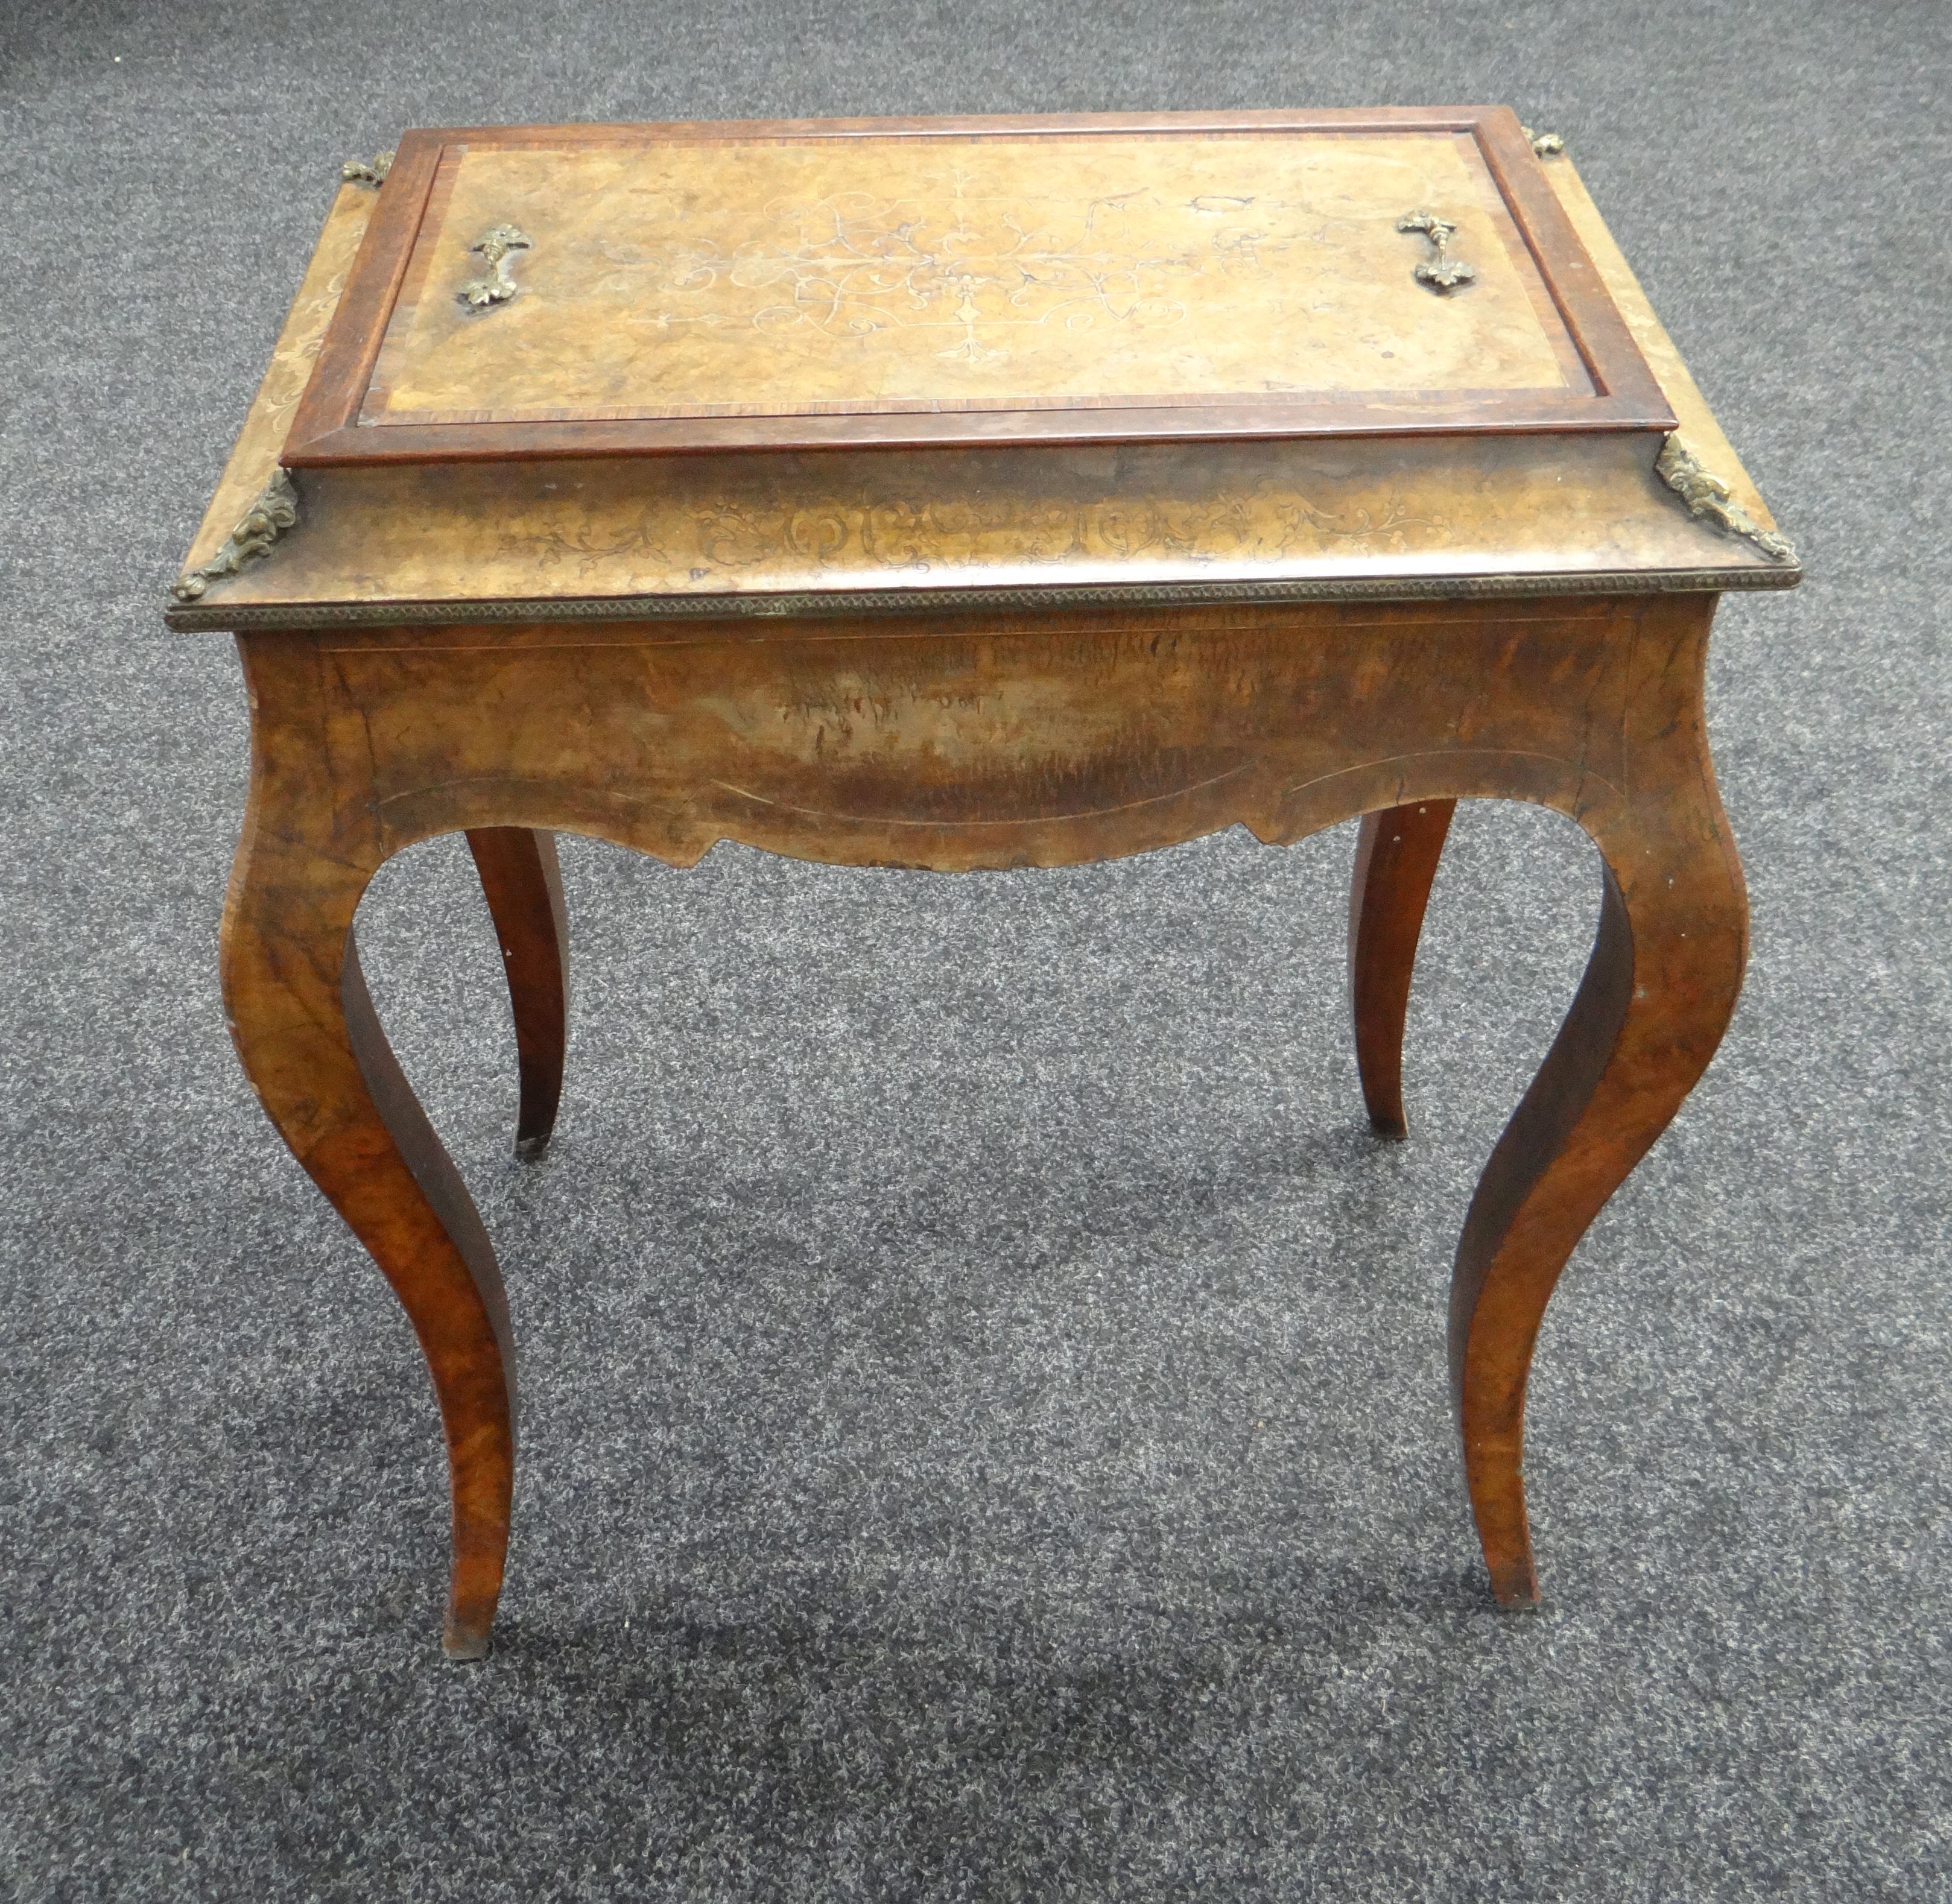 A NINETEENTH CENTURY MARQUETRY WALNUT SEWING TABLE with ormolu fittings and on shaped legs (